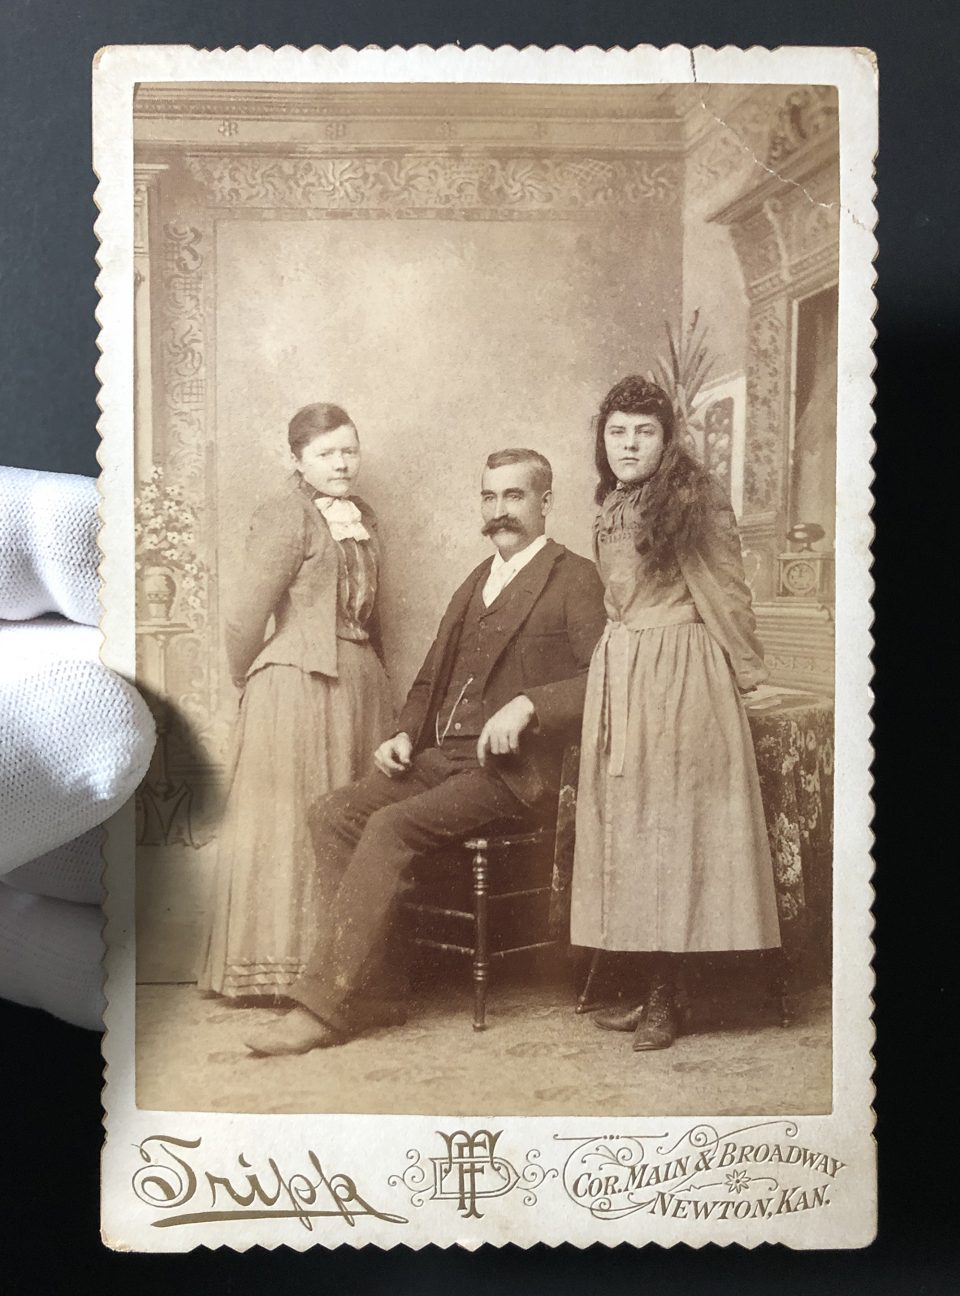 This unidentified family posed in the studio of Frank D. Tripp at the corner of Main Street and Broadway in Newton, Kansas, likely in the late 1880s. The backdrop was a painted scene.